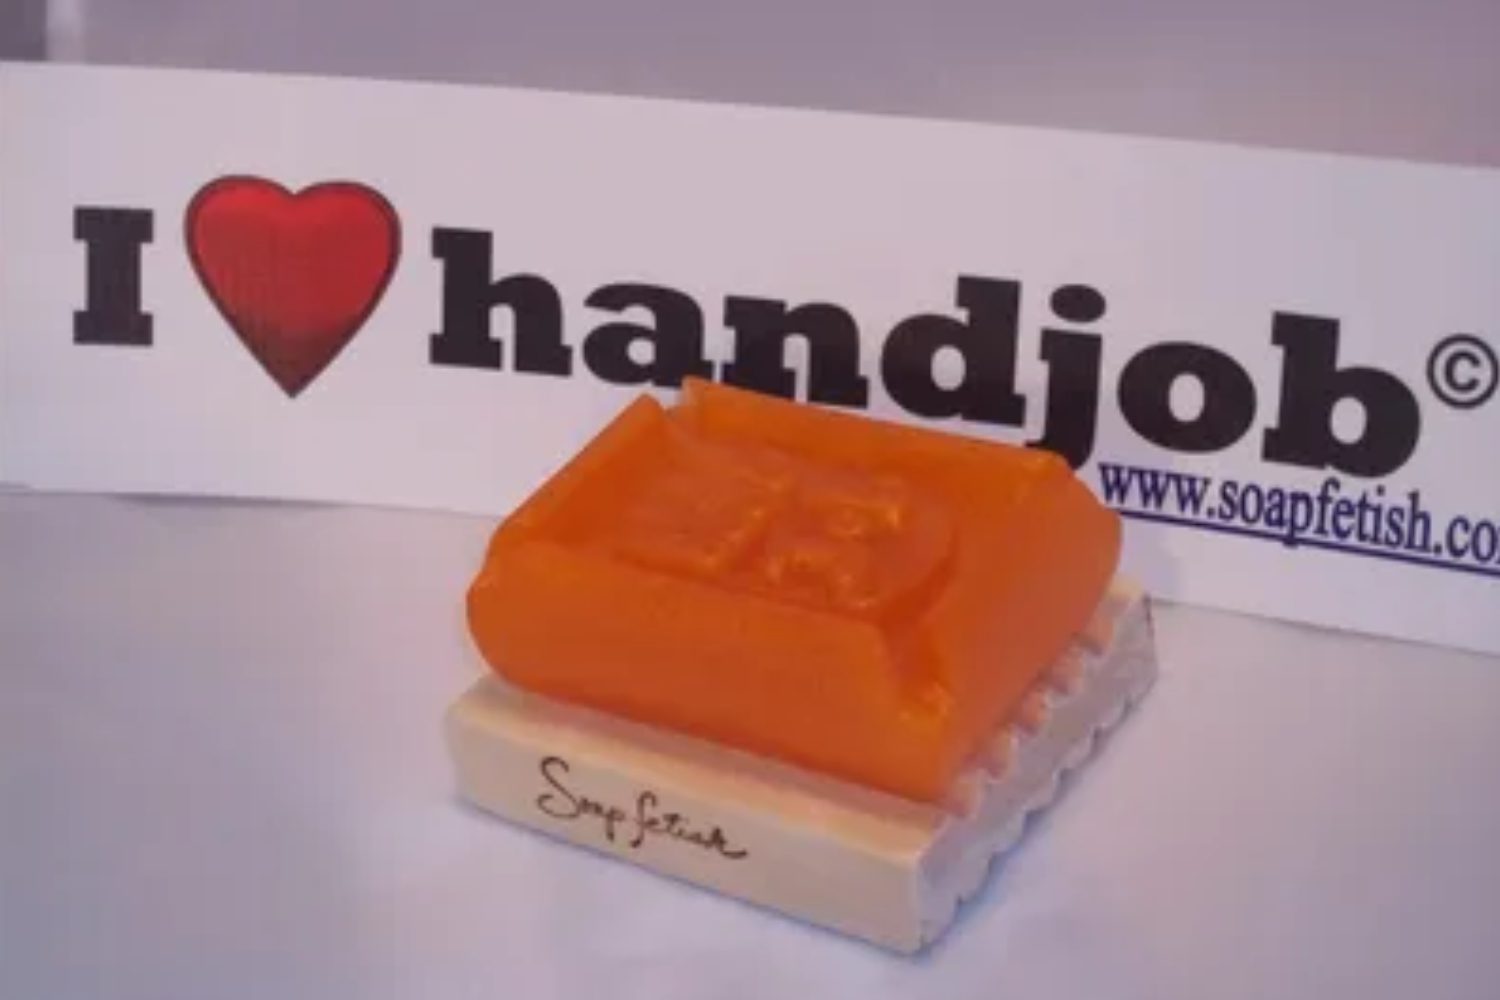 A soap on top of a wooden block.